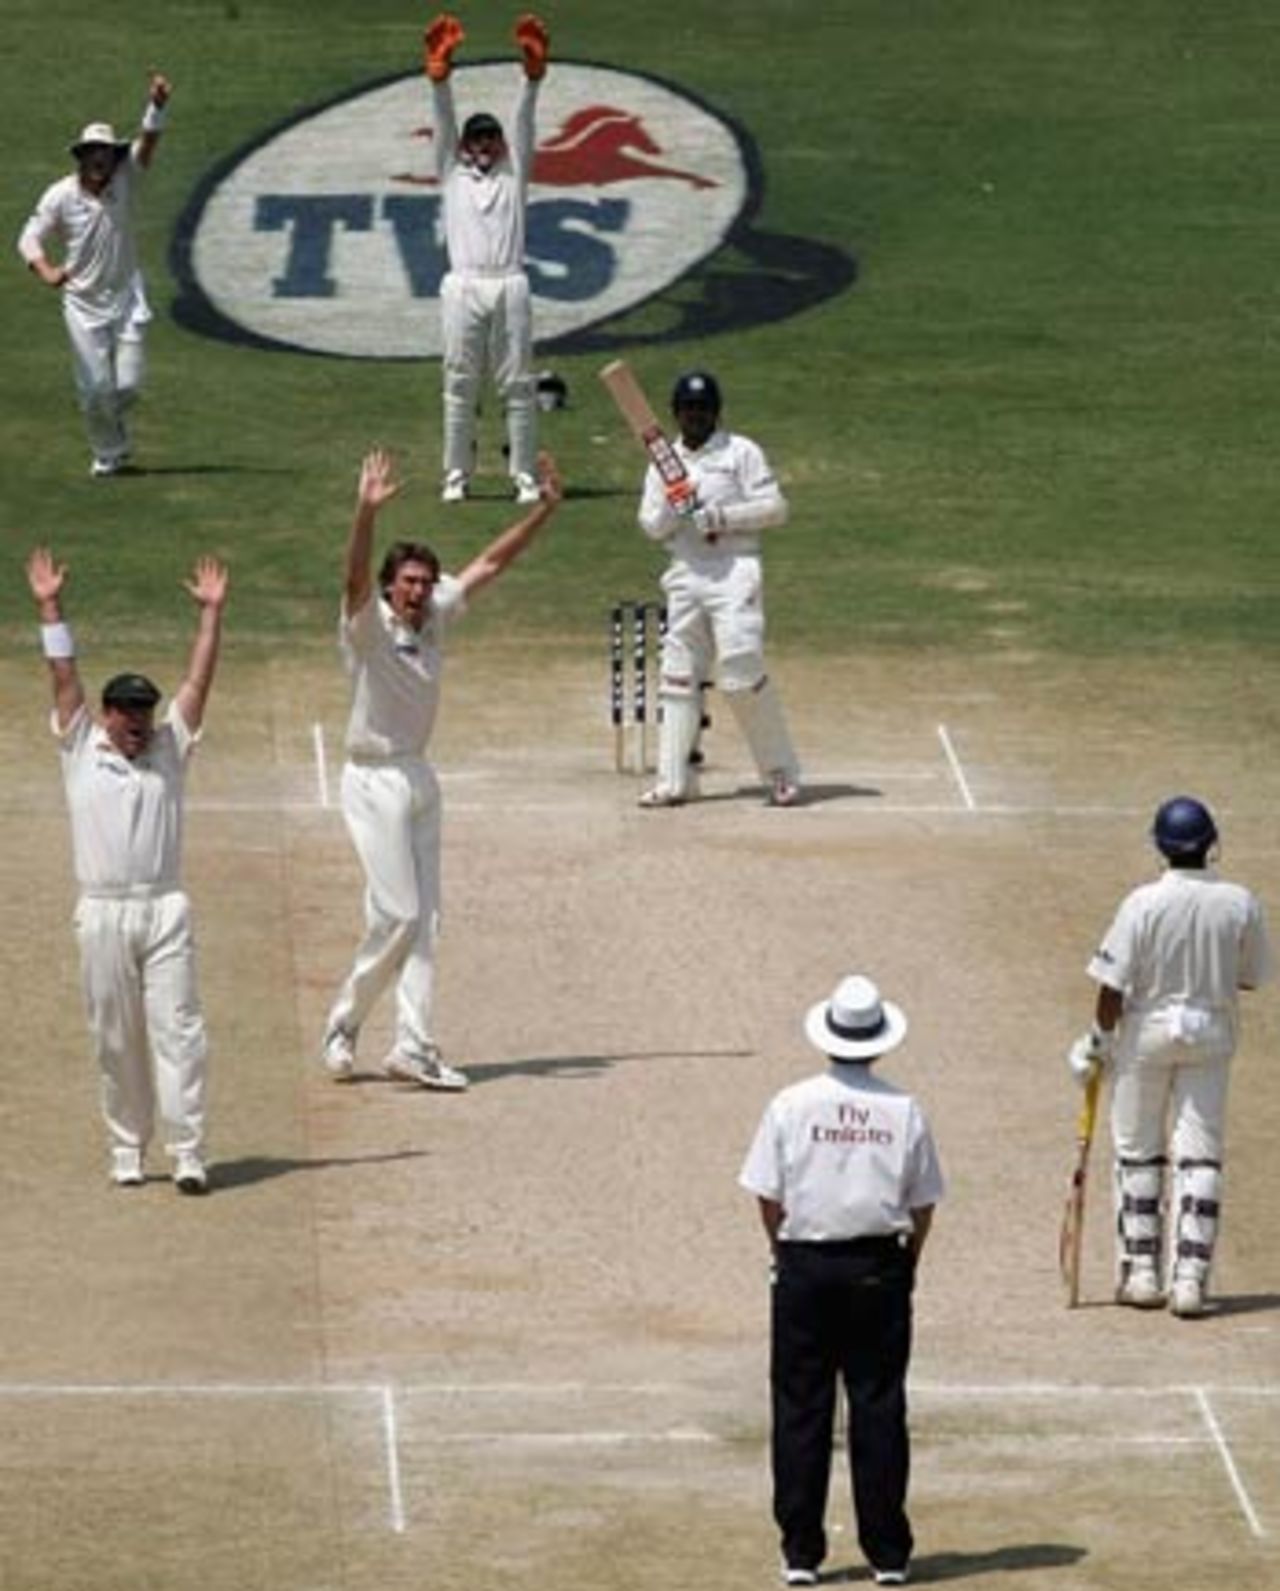 India's second innings began disastrously as Virender Sehwag was given out lbw to Glenn McGrath, India v Australia, 1st Test, Bangalore, 3rd day, October 9, 2004